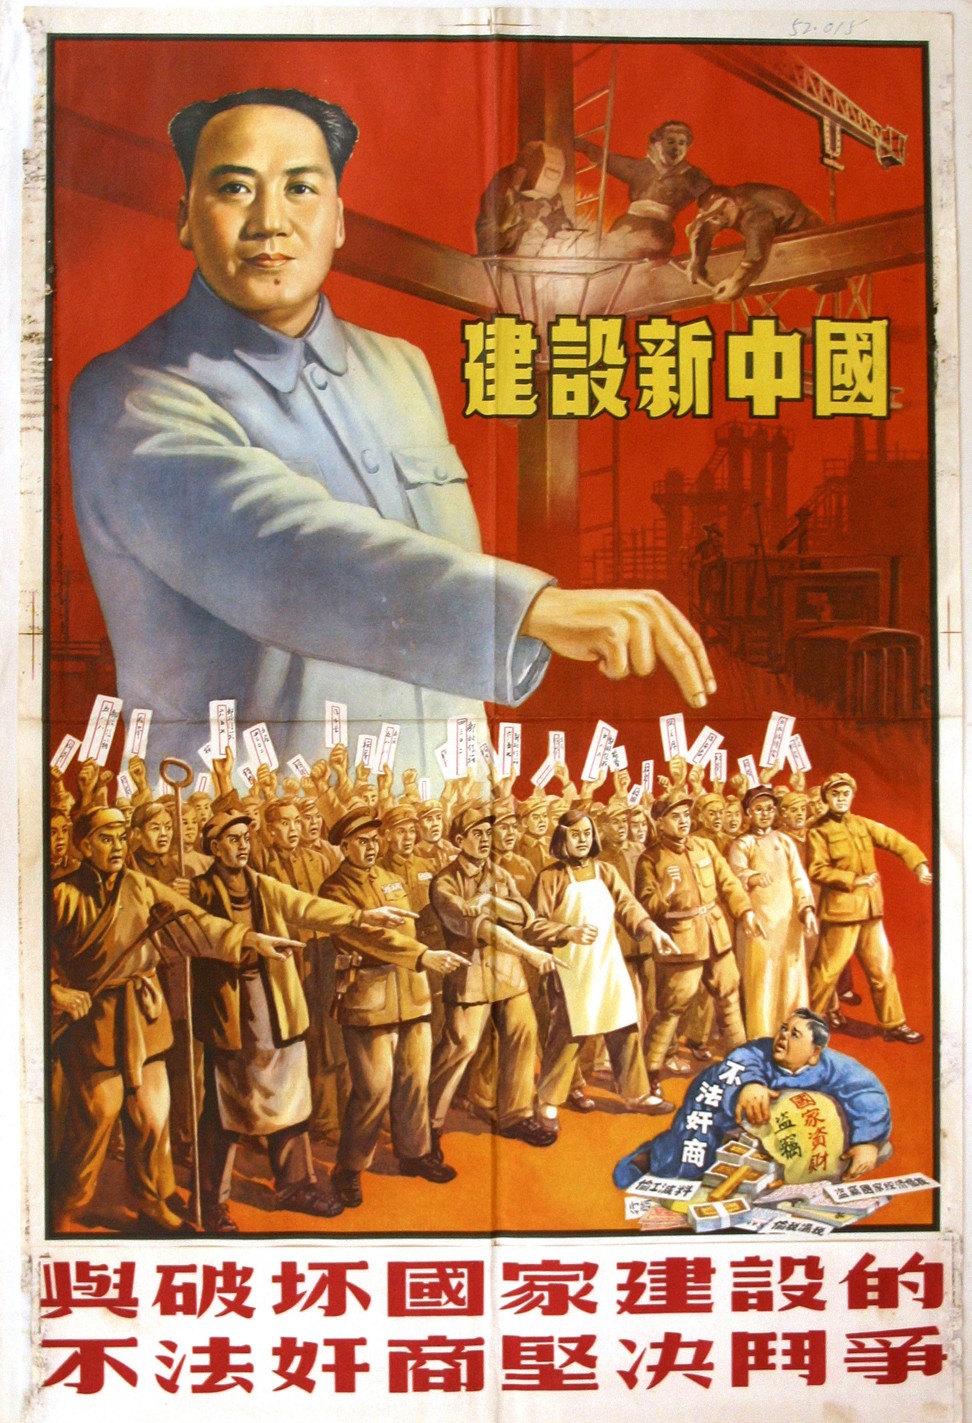 Teng was recruited to create propaganda artwork, such as this poster.